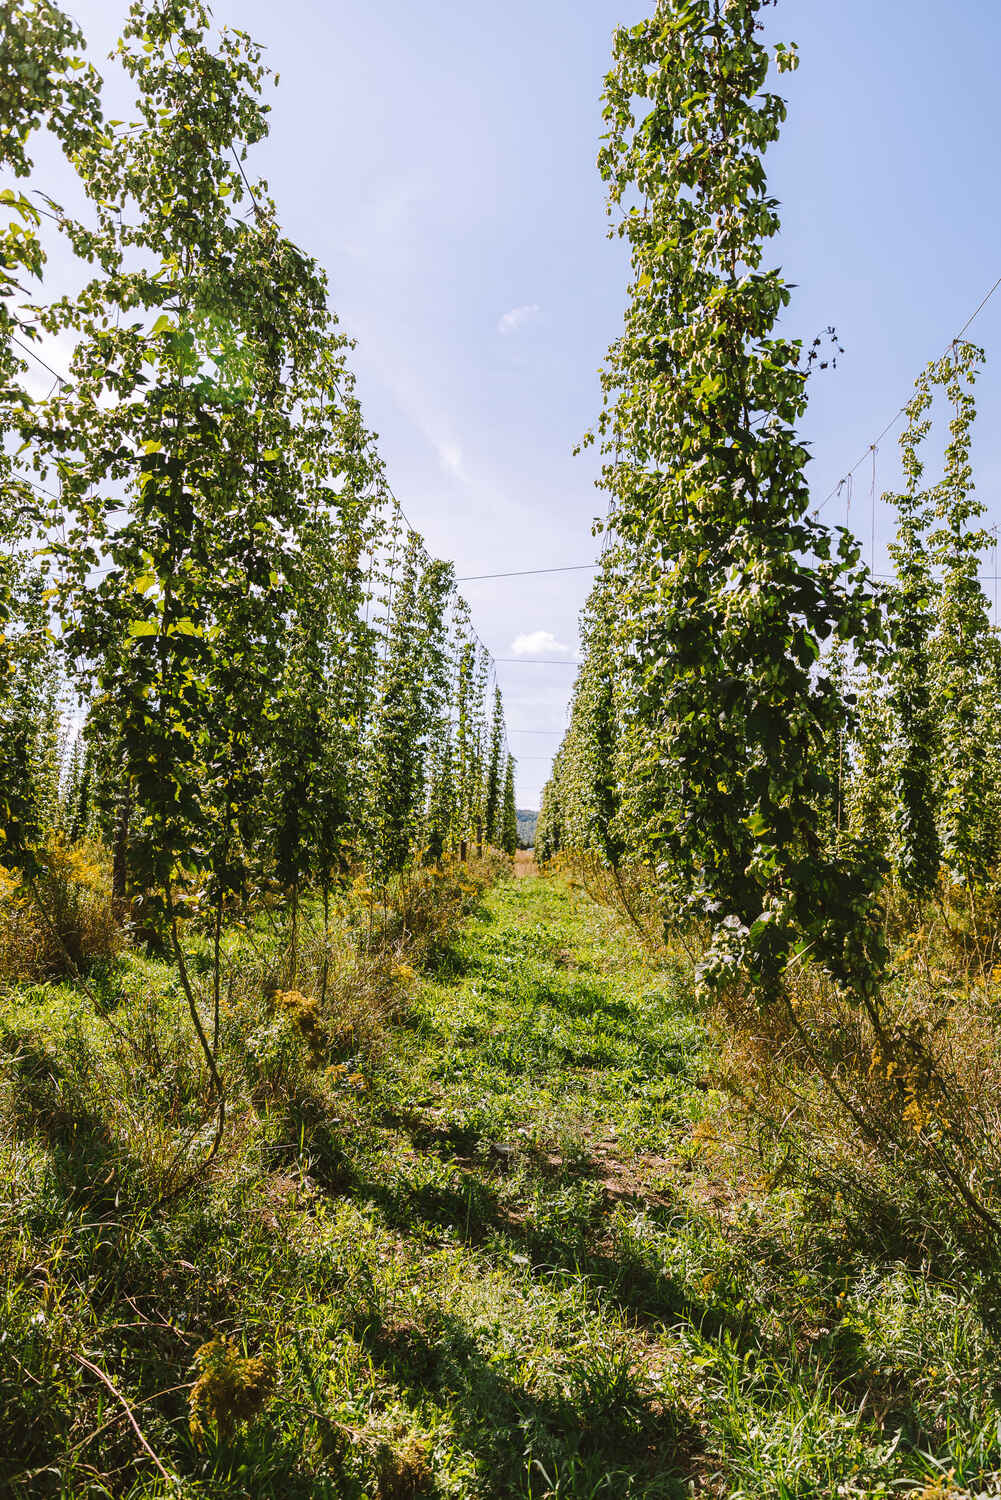 Aroostook Farm Hops from up in Maine